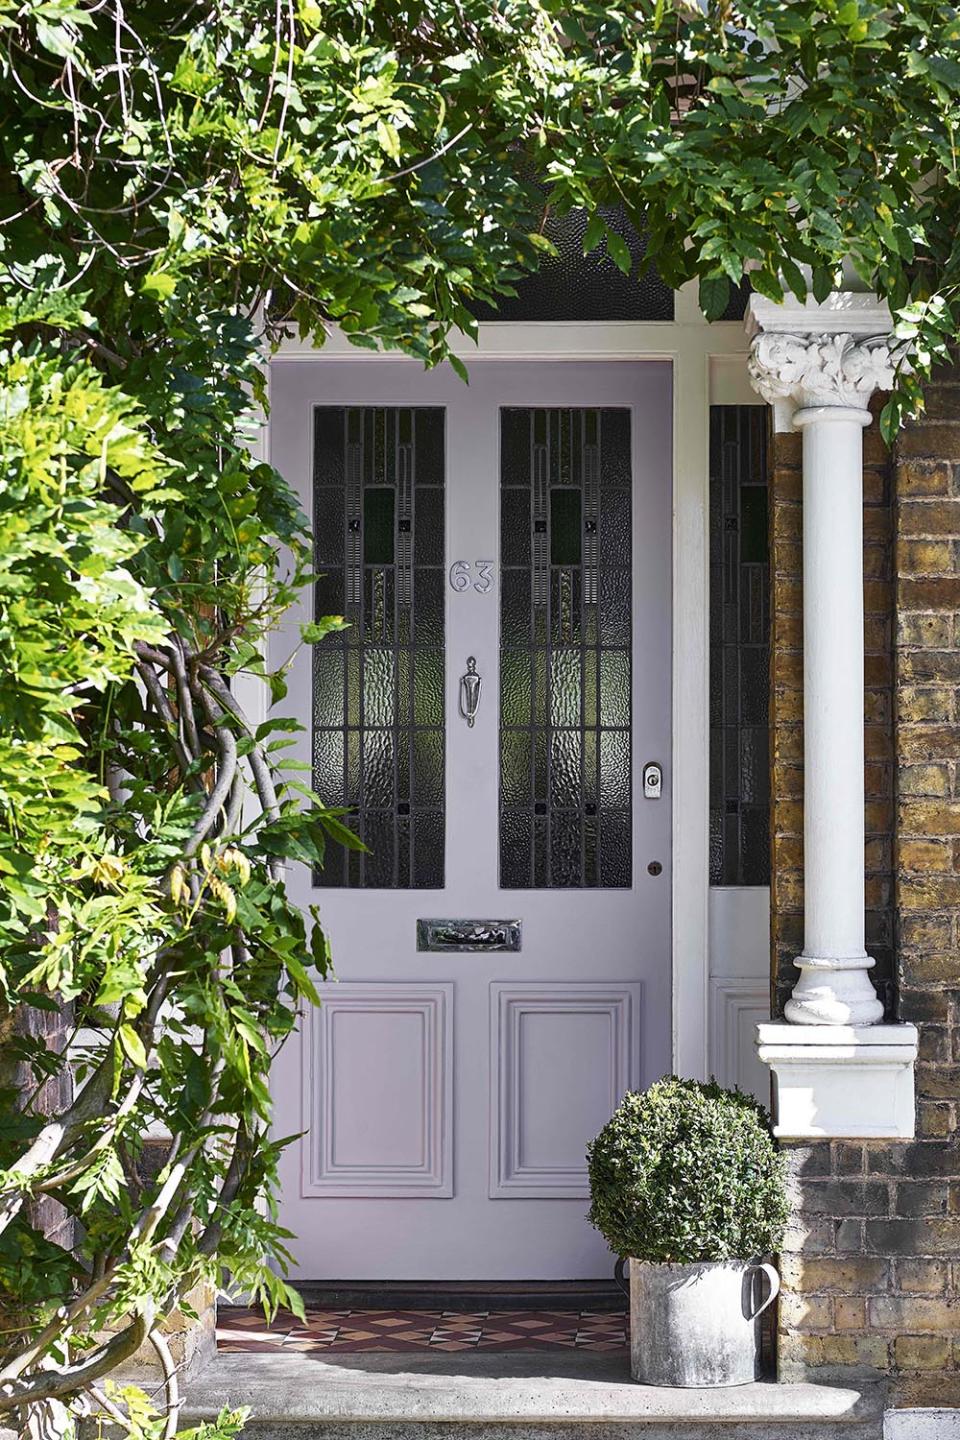 Traditional brick house with pale purple door surrounded by greenery